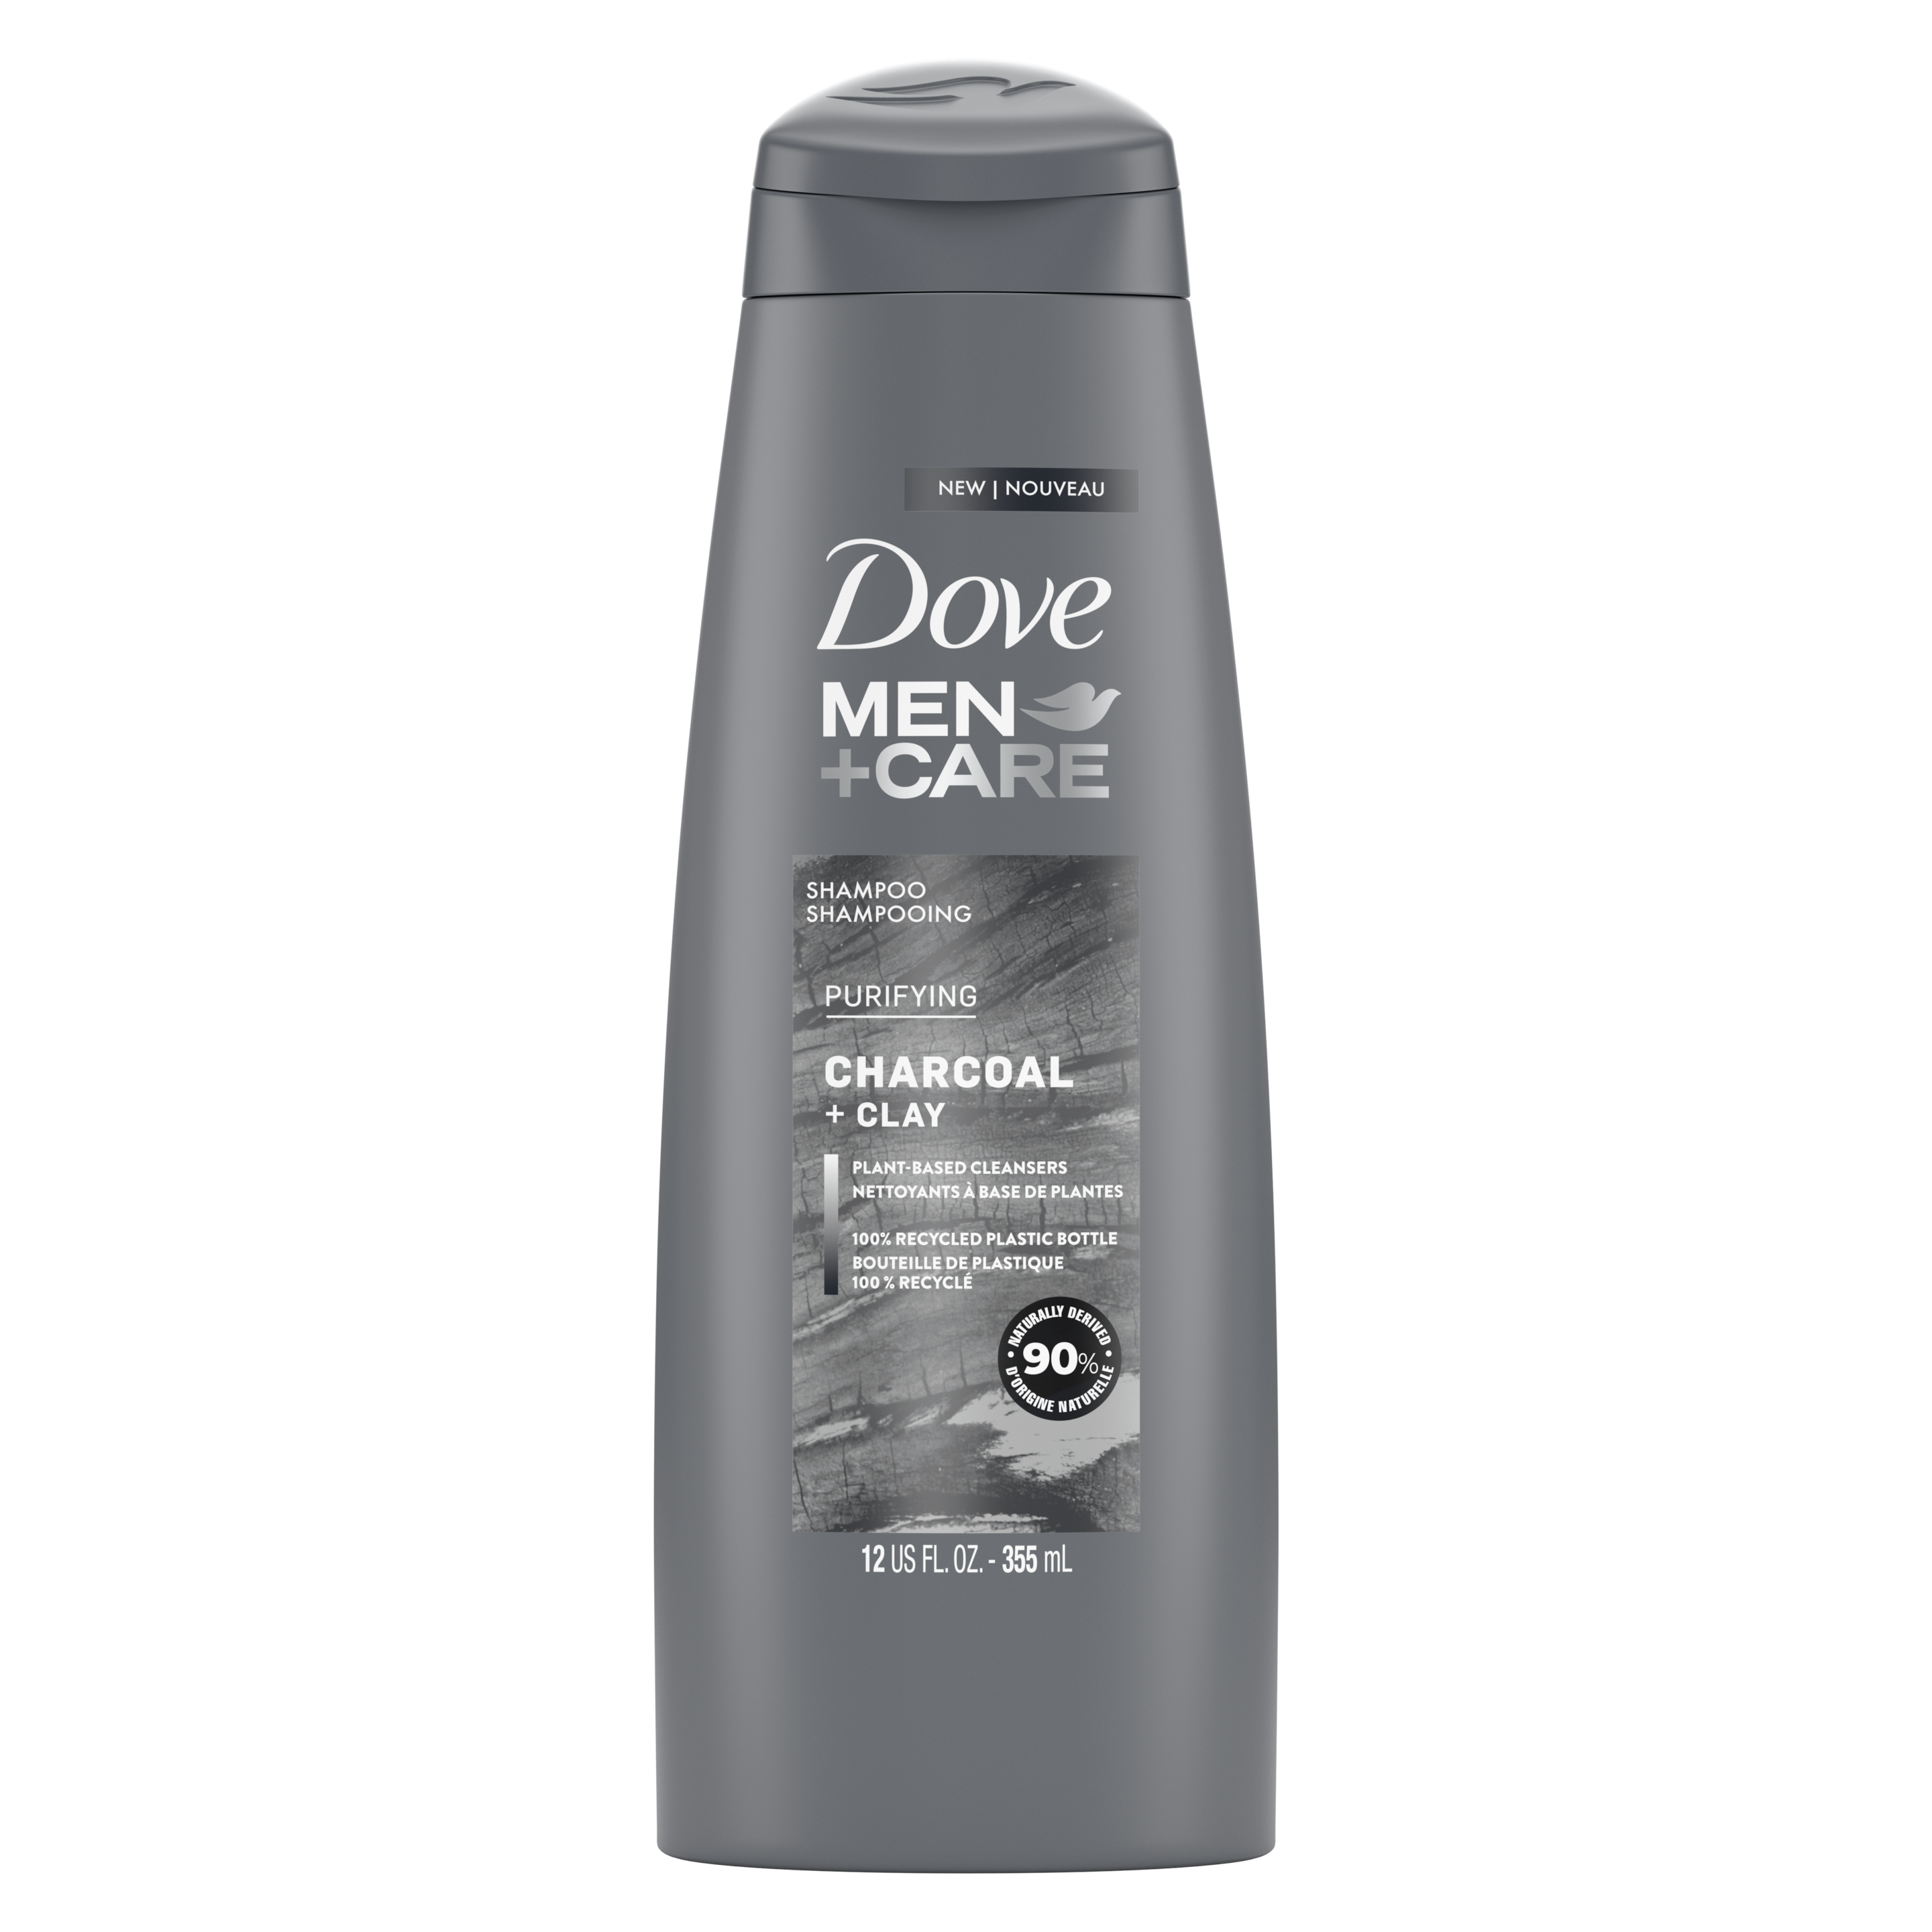 Dove Men+Care Elements Charcoal Purifying Shampoo 12 oz Front of Pack